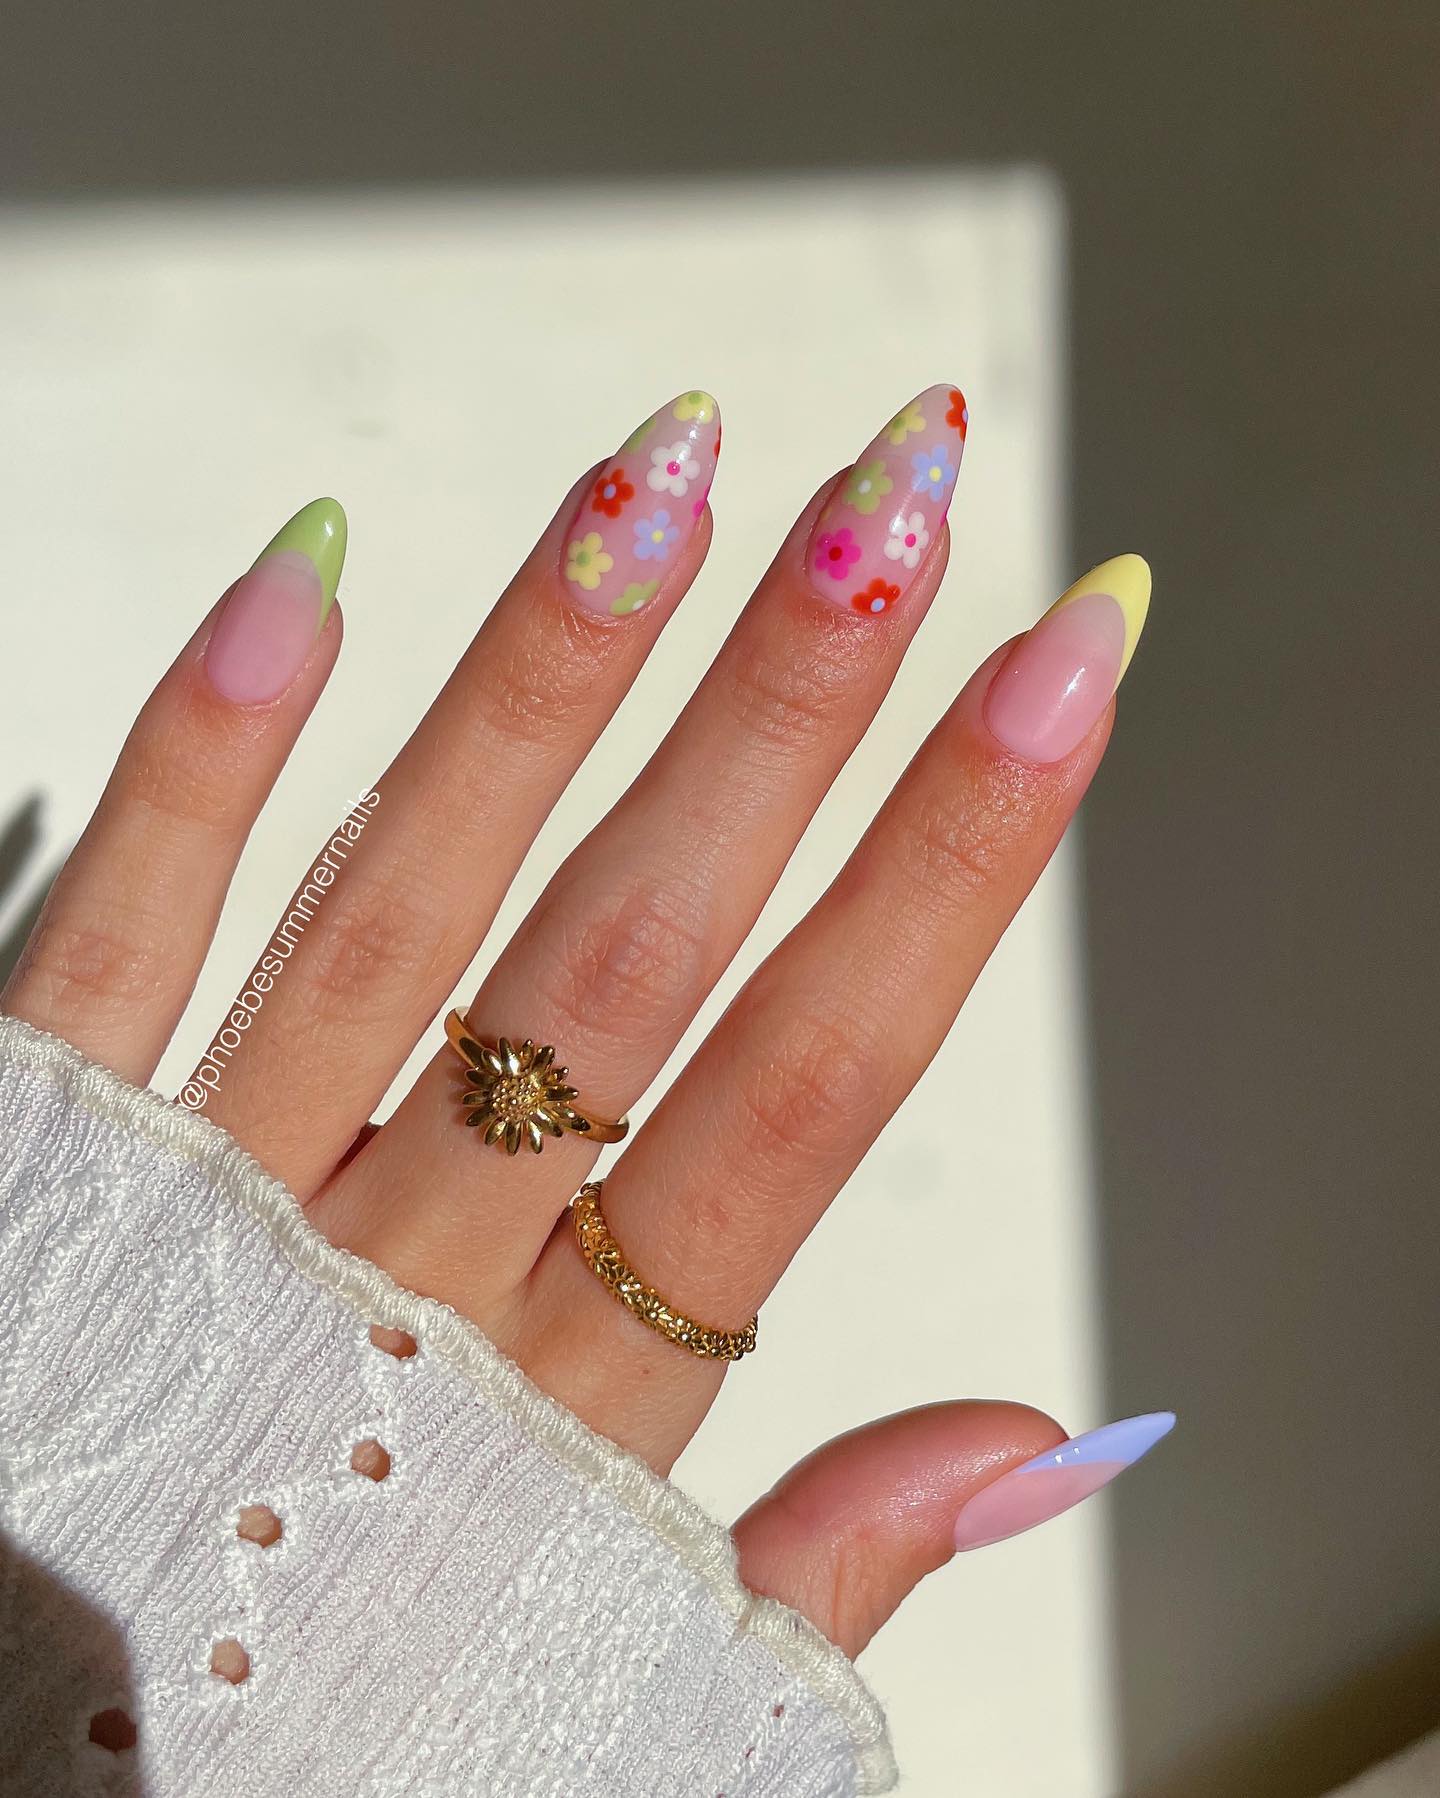 100+ Short Nail Designs You’ll Want To Try This Year images 80